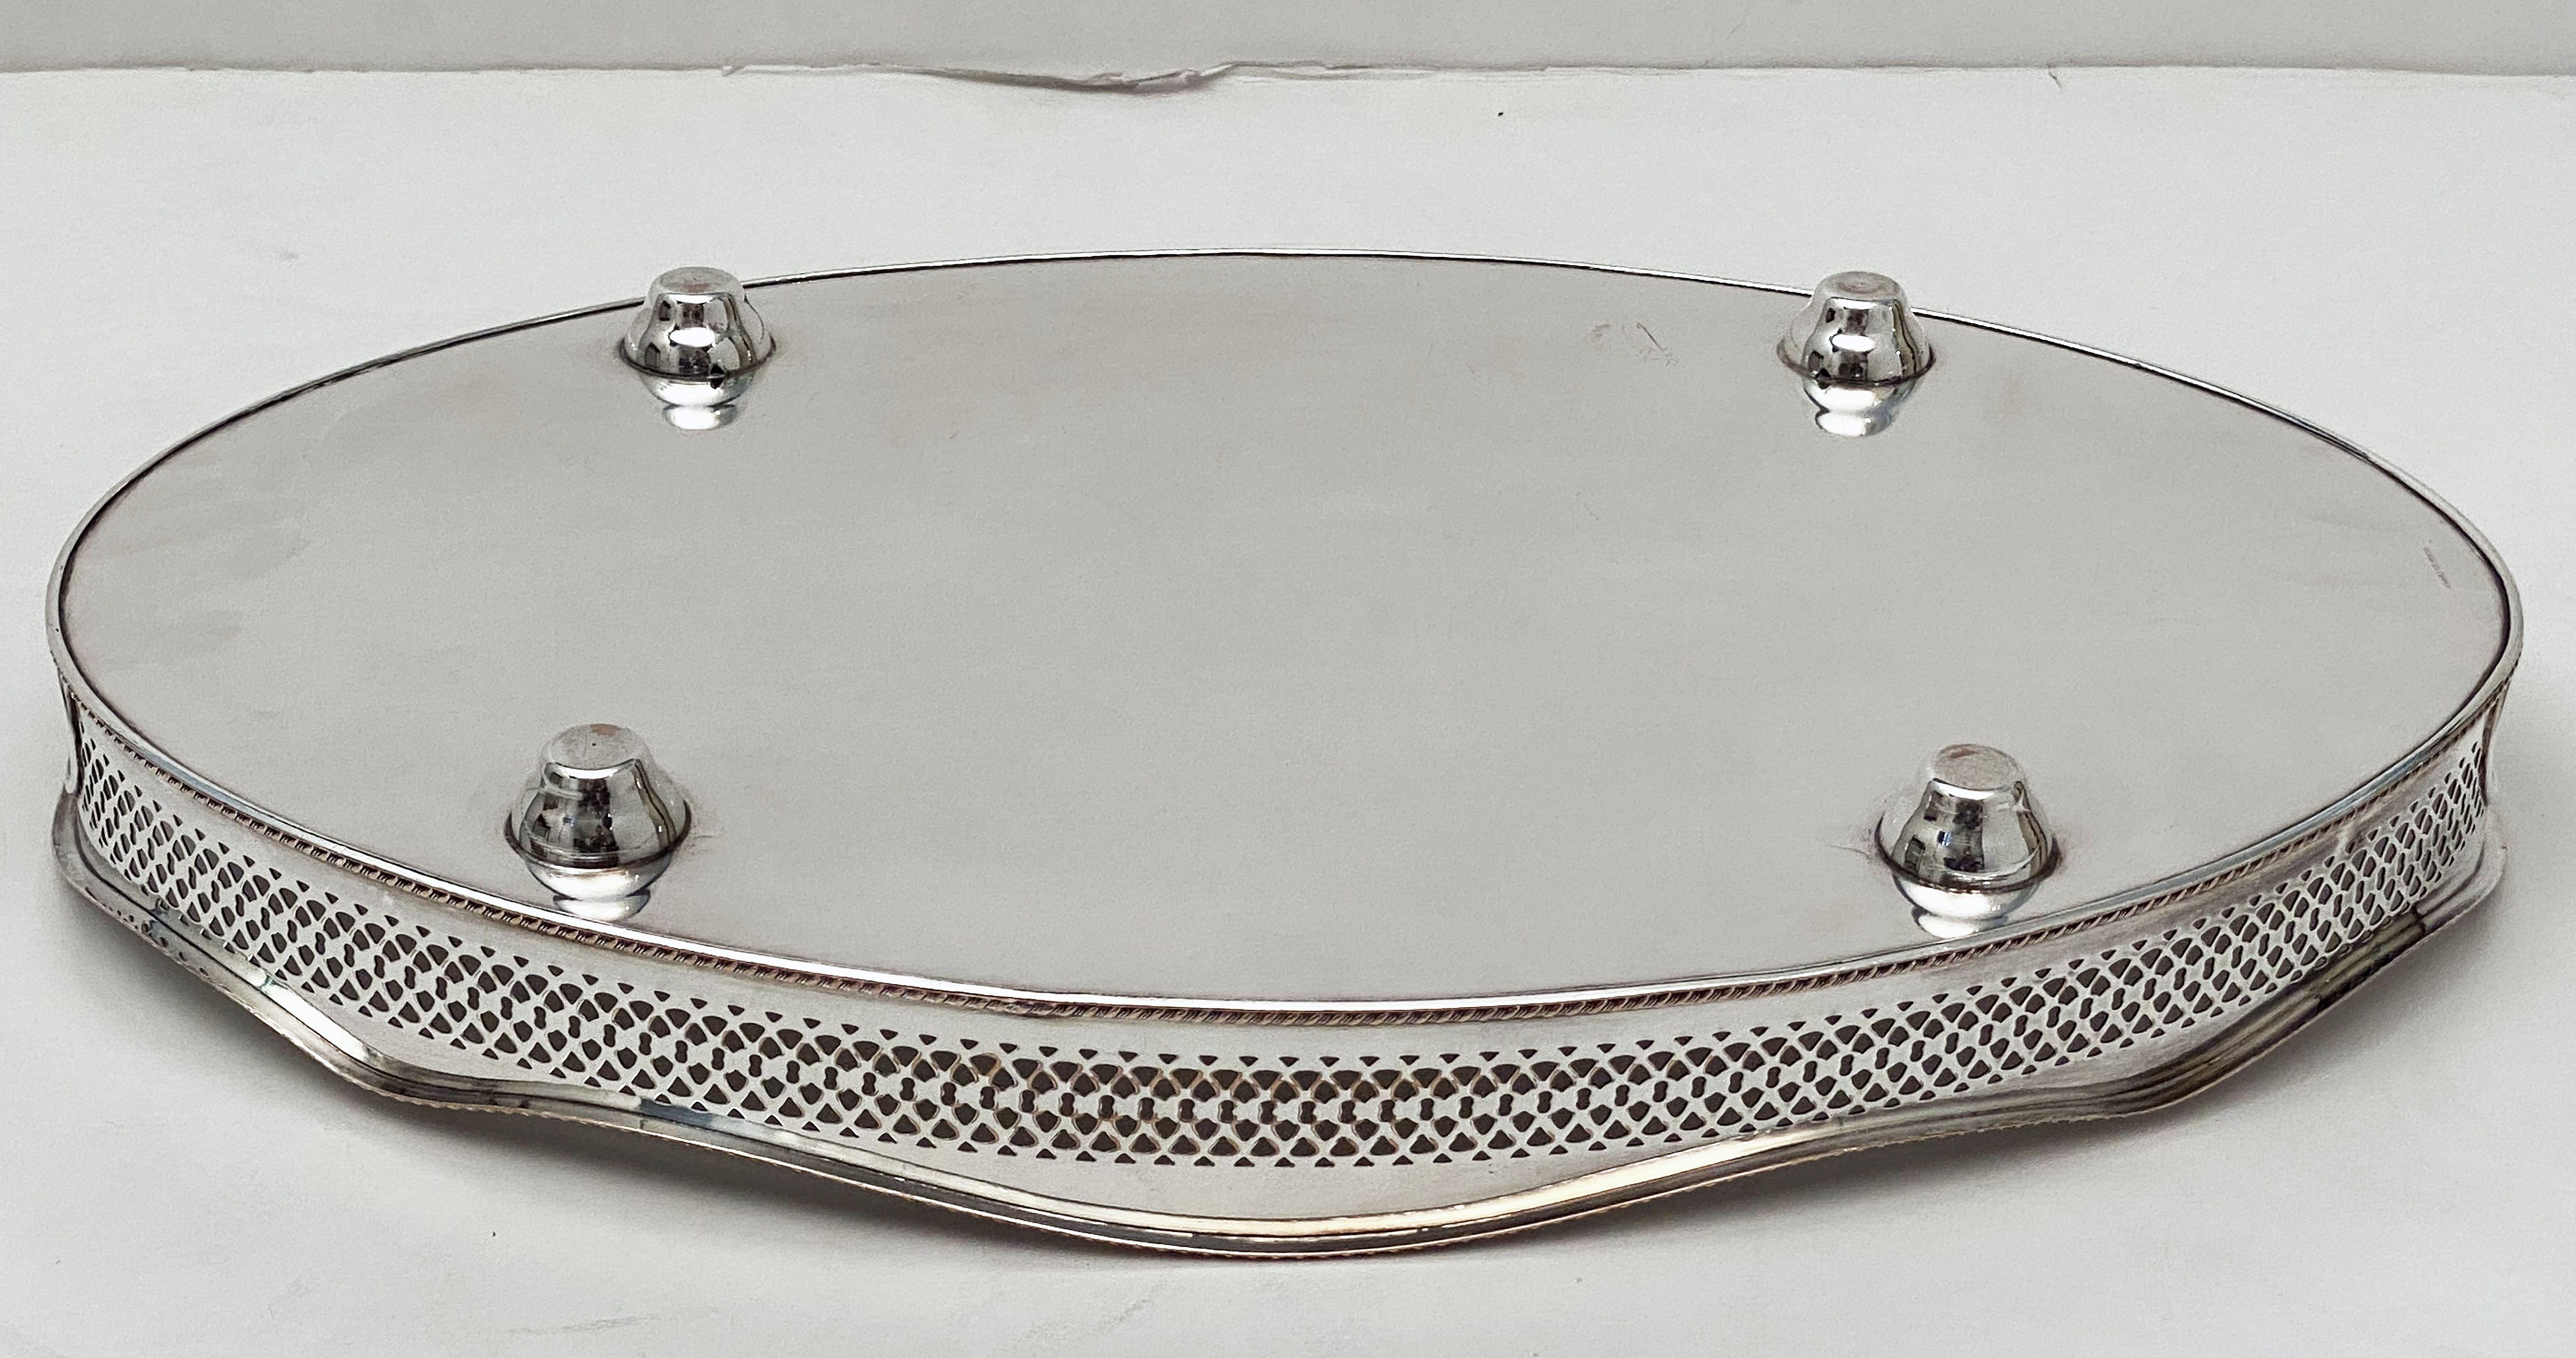 Pair of English Silver Oval Gallery Serving or Drinks Trays 'Priced as a Pair' 14